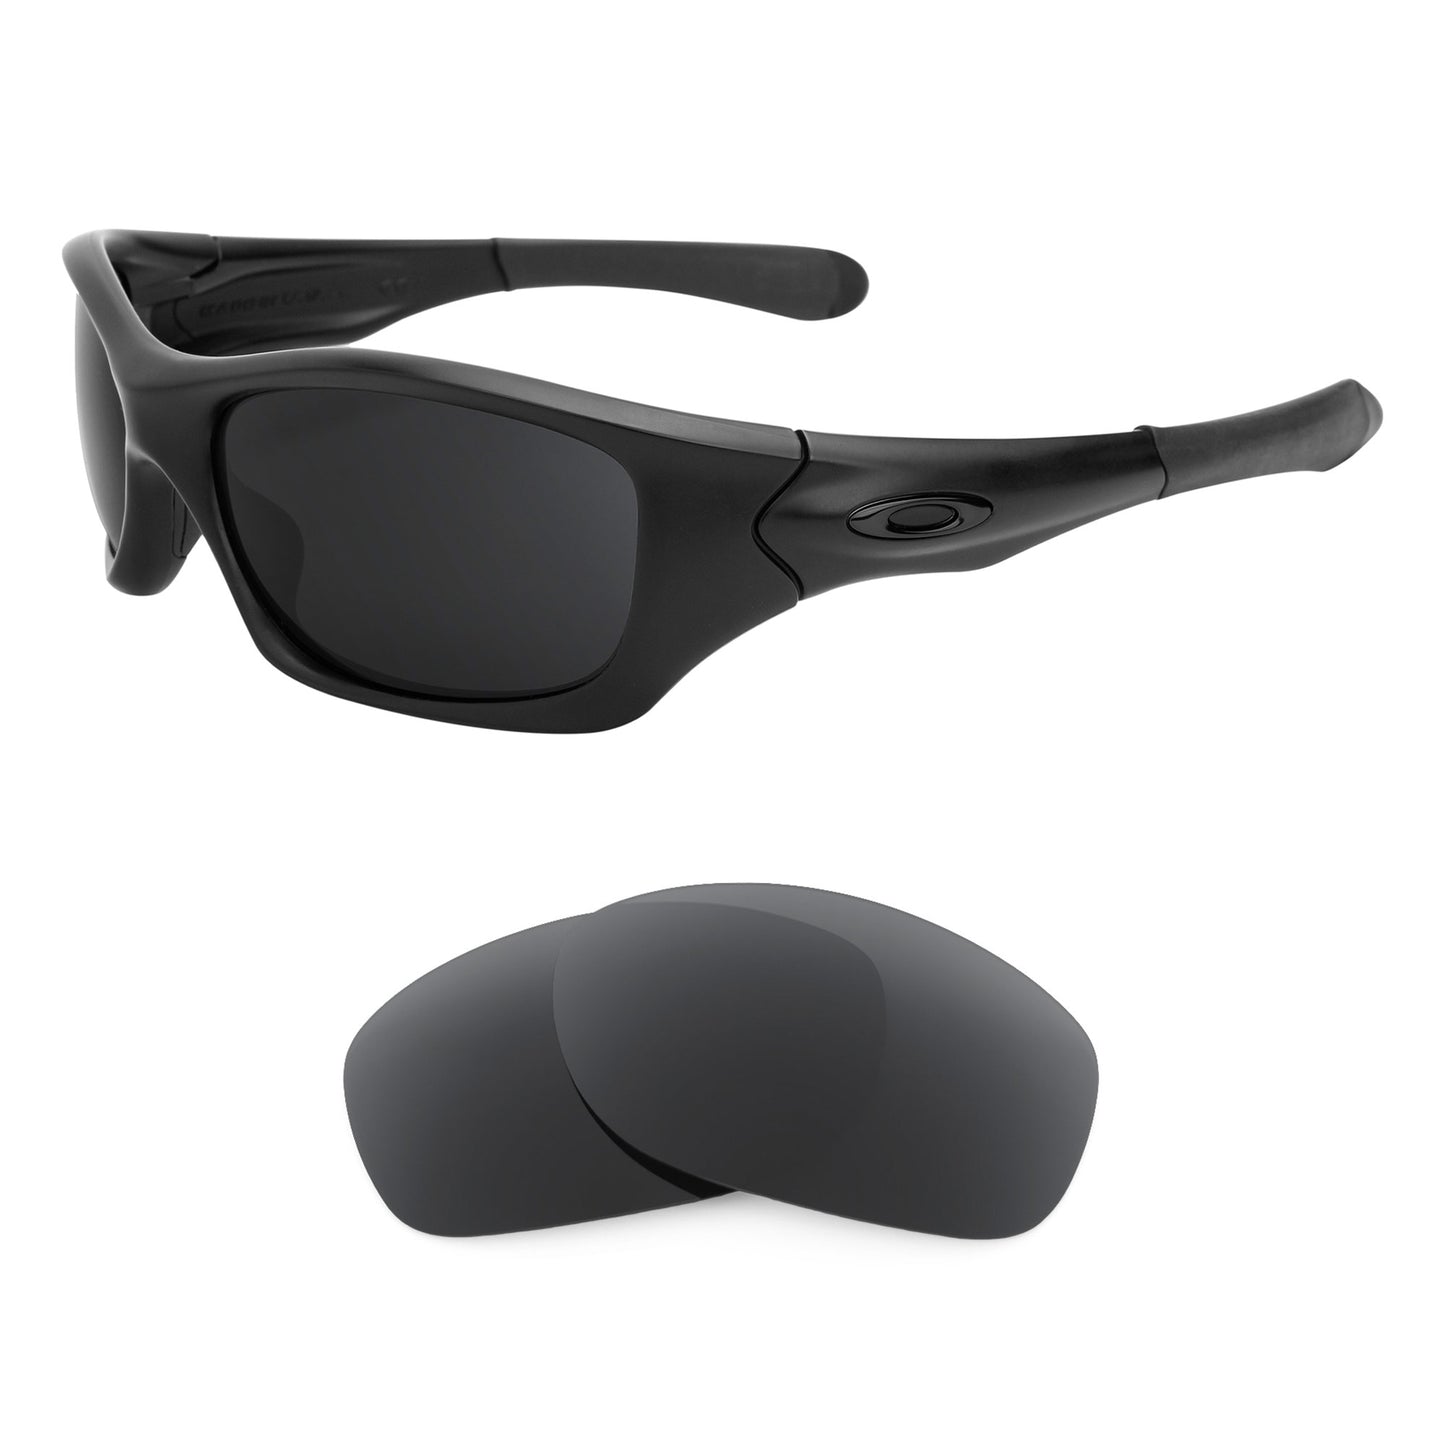 Oakley Pit Bull sunglasses with replacement lenses